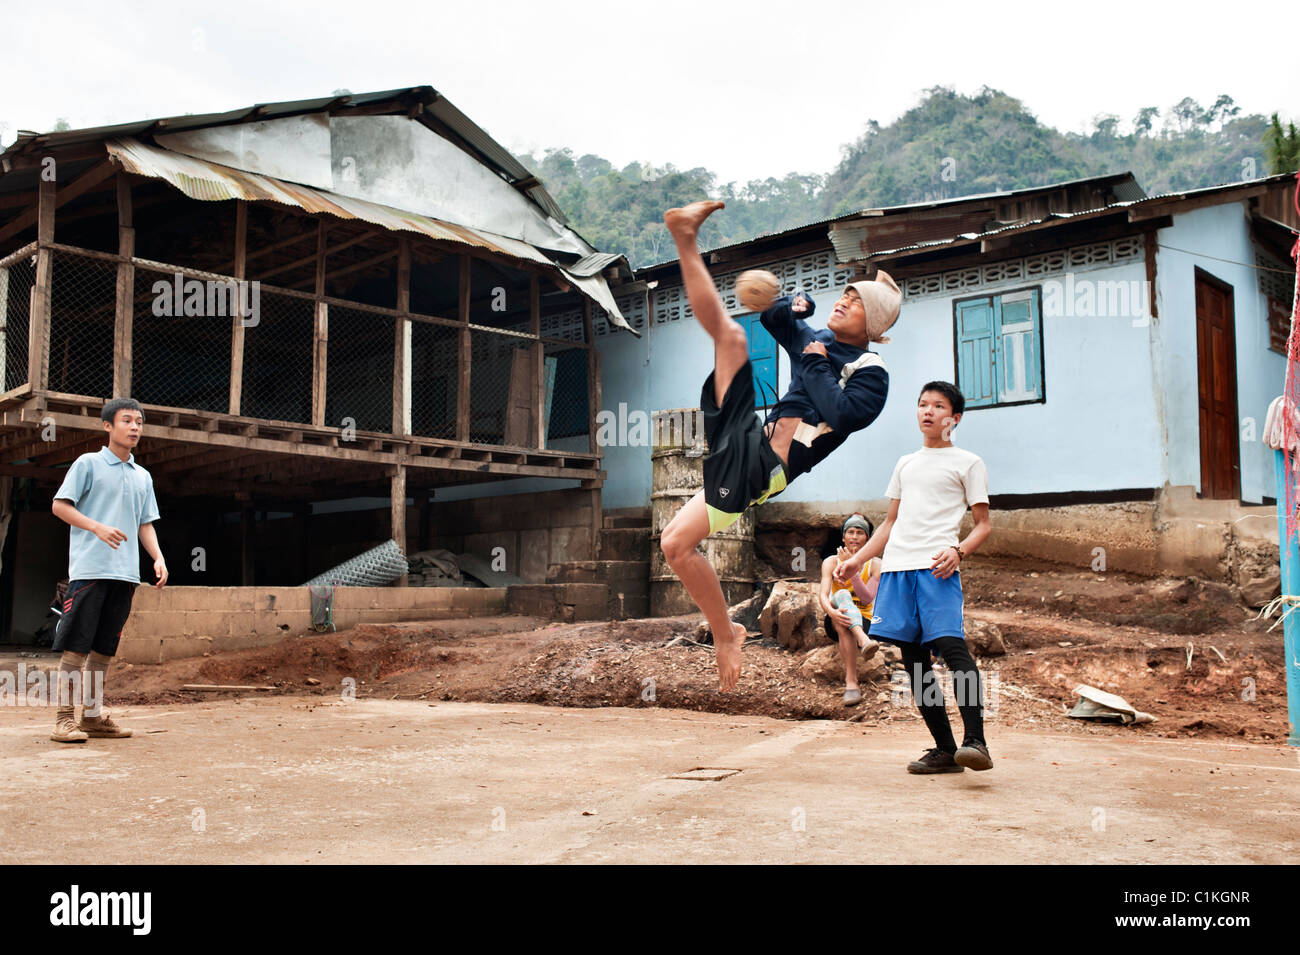 Teenage boys playing a game of Sepak takraw in the Mae La refugee camp, Tak province, Thailand, Asia. Stock Photo